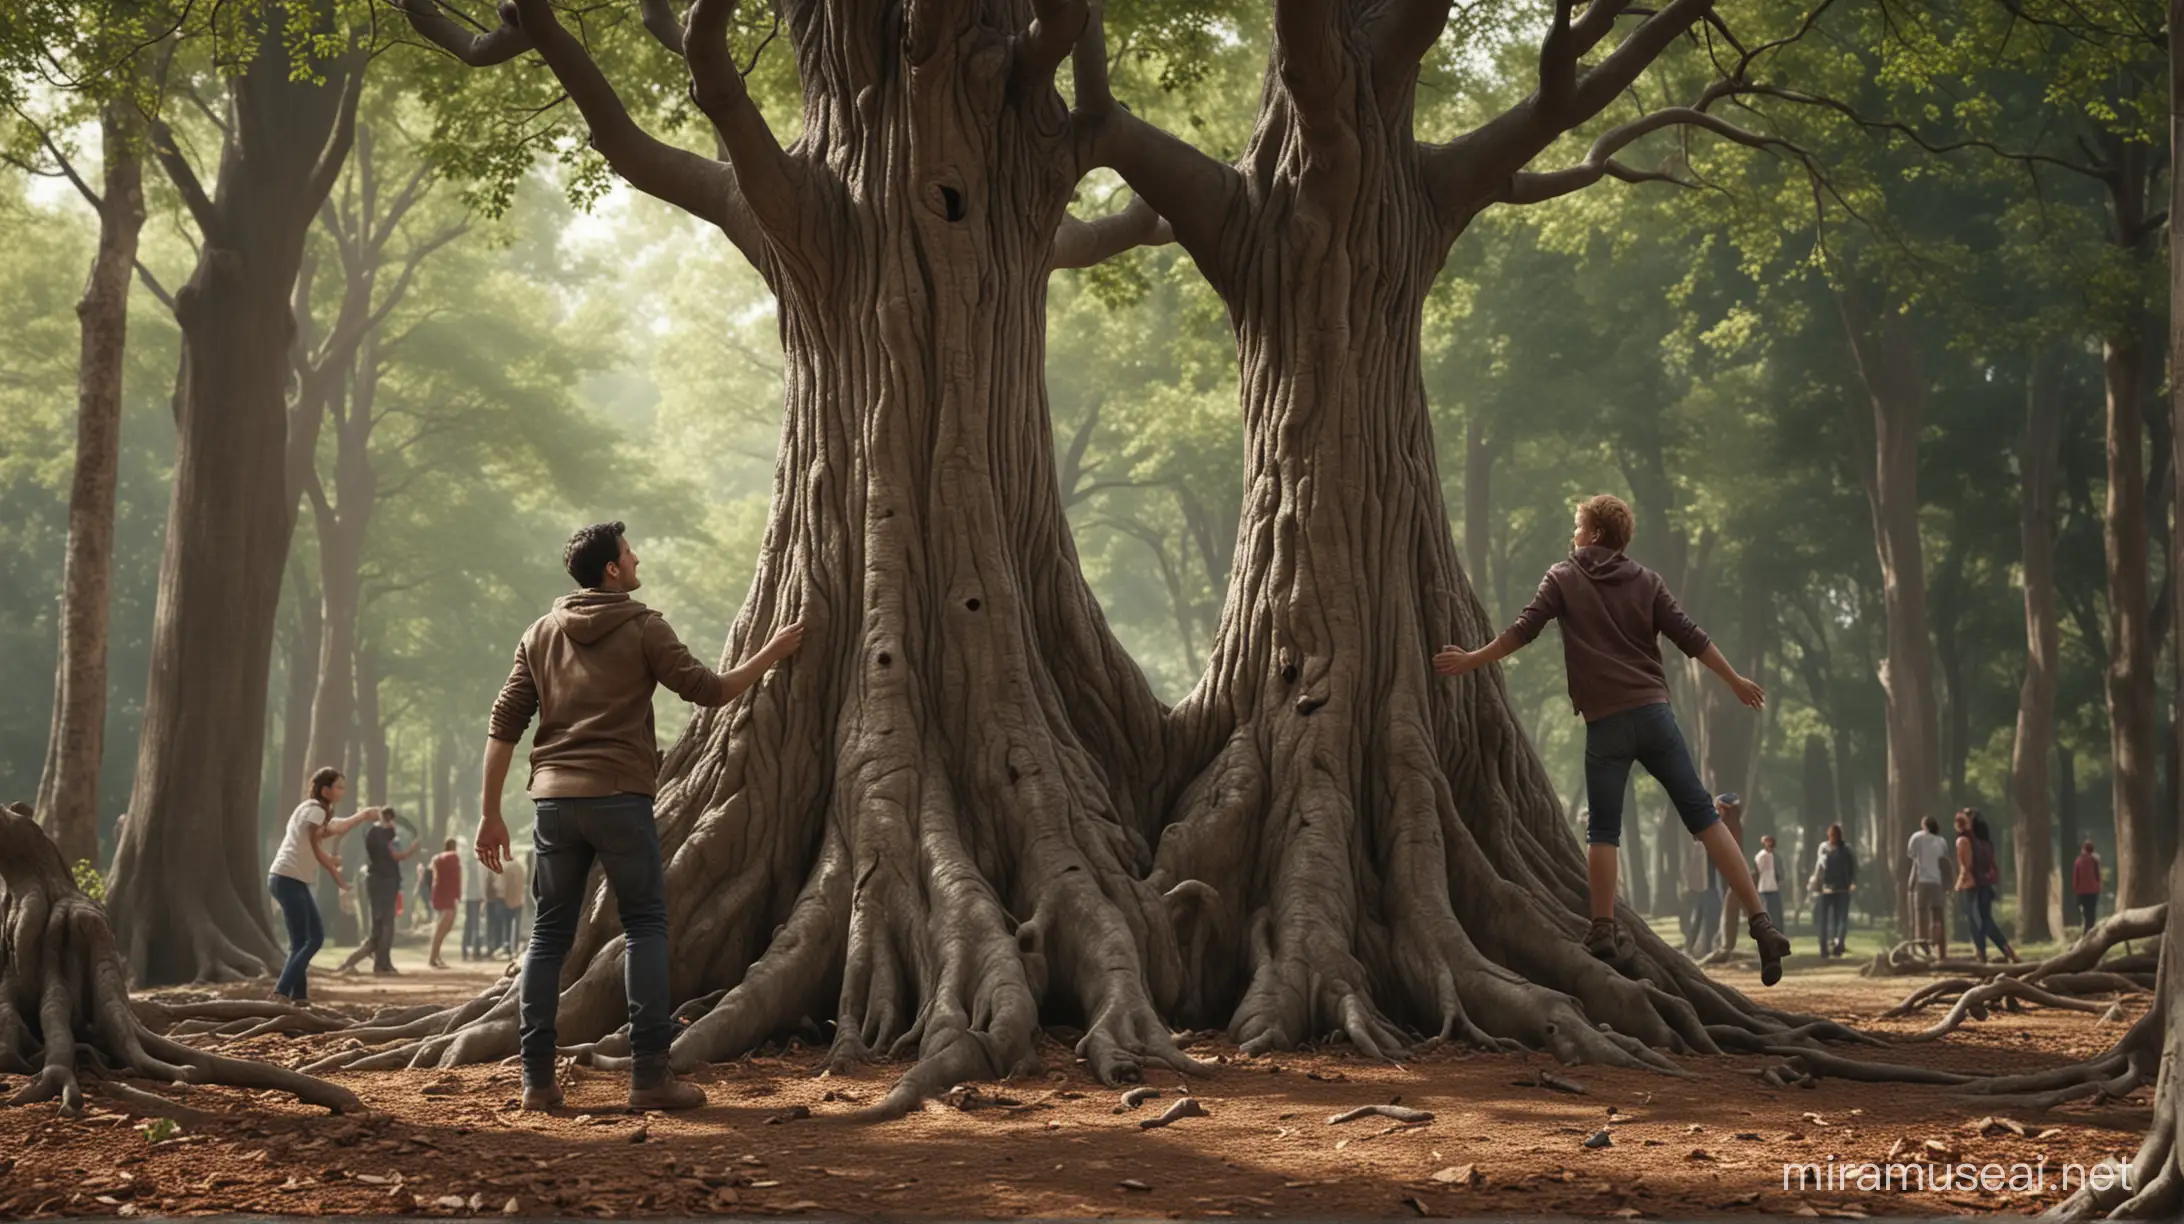 Diverse Group Holding Hands Around a Tree in Photorealistic Scene